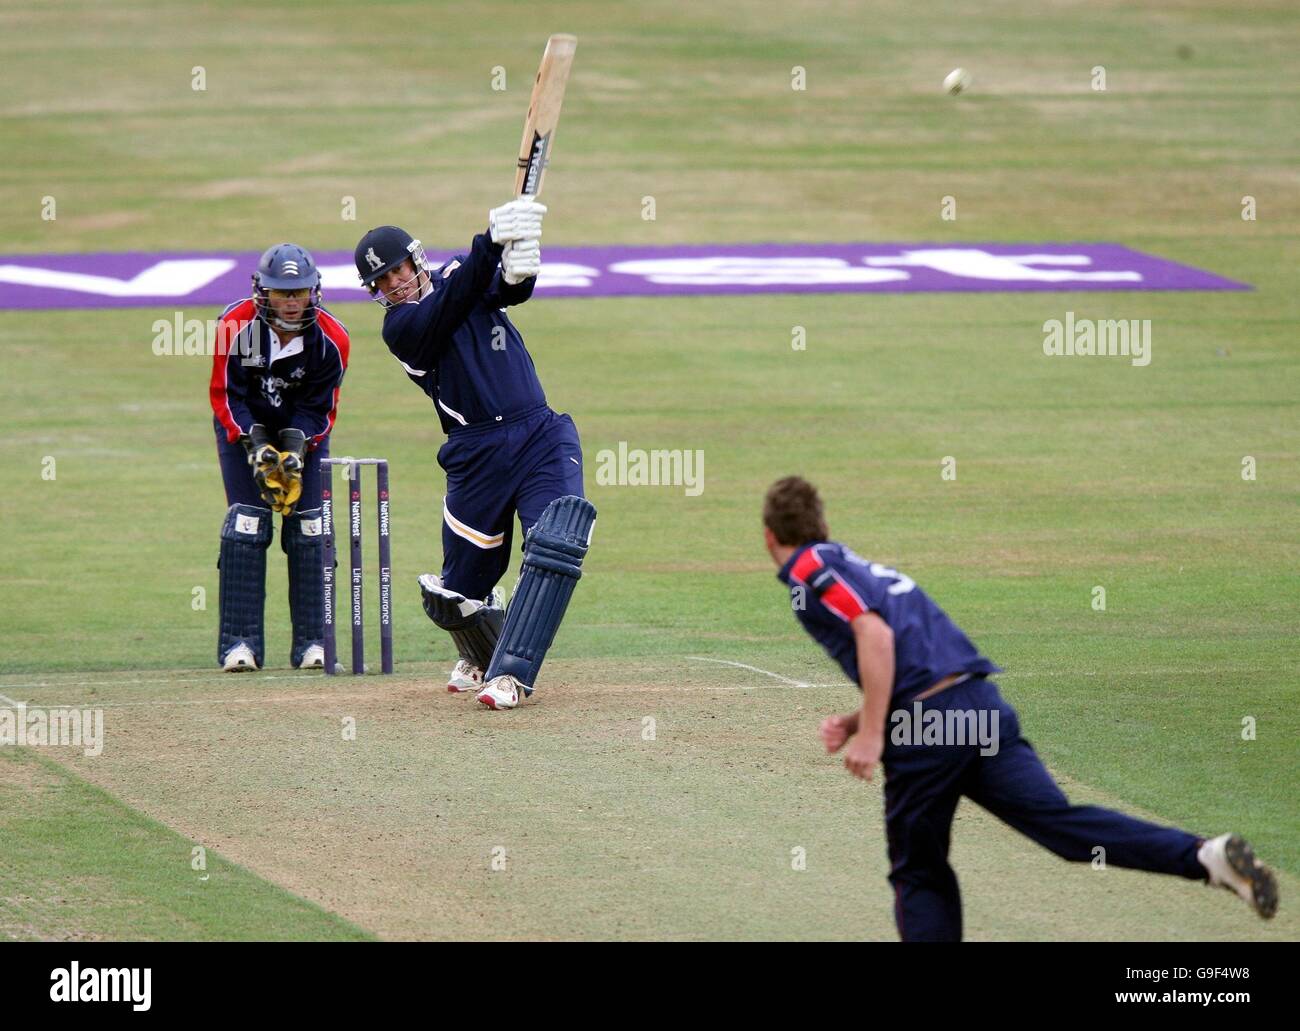 Warwickshire's Heath Streak 'holes out' off the bowling of Middlesex's Chad Keegan for 16 during the NatWest Pro40 League, Division One match at Edgbaston, Birmingham. Stock Photo